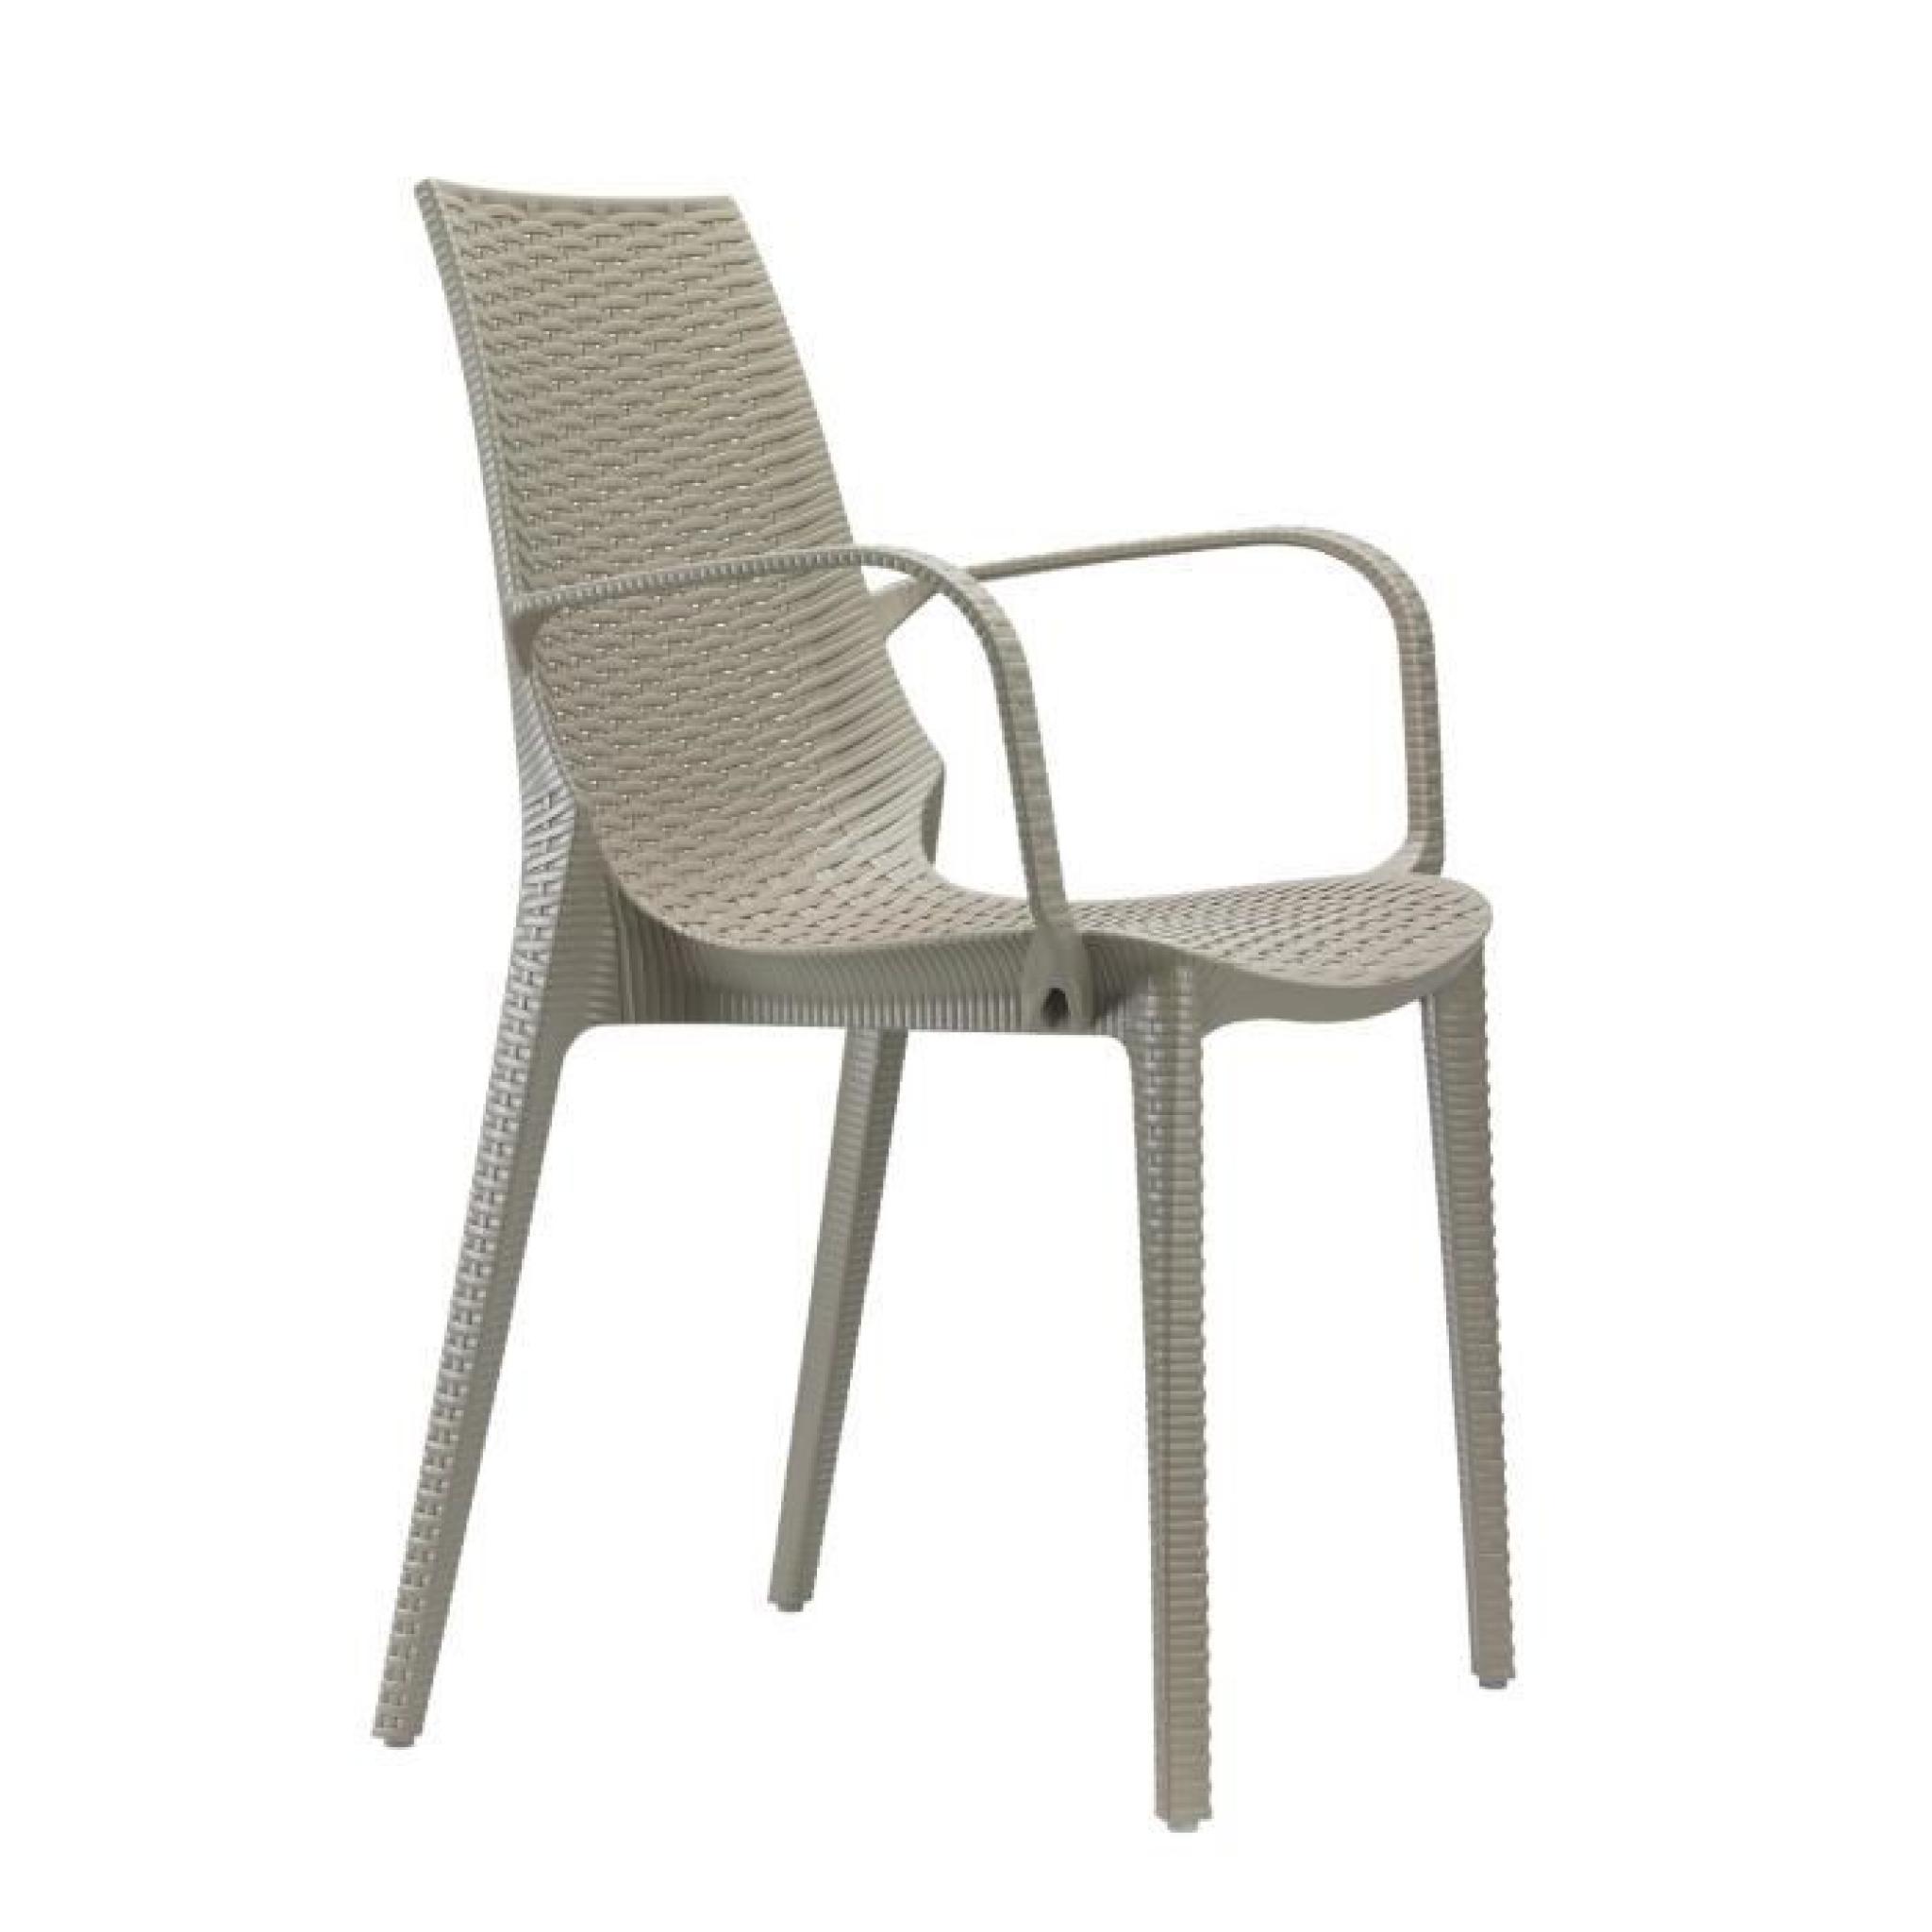 Chaise tissee grise taupe design - LUCREZIA avec accoudoirs grise taupe - deco